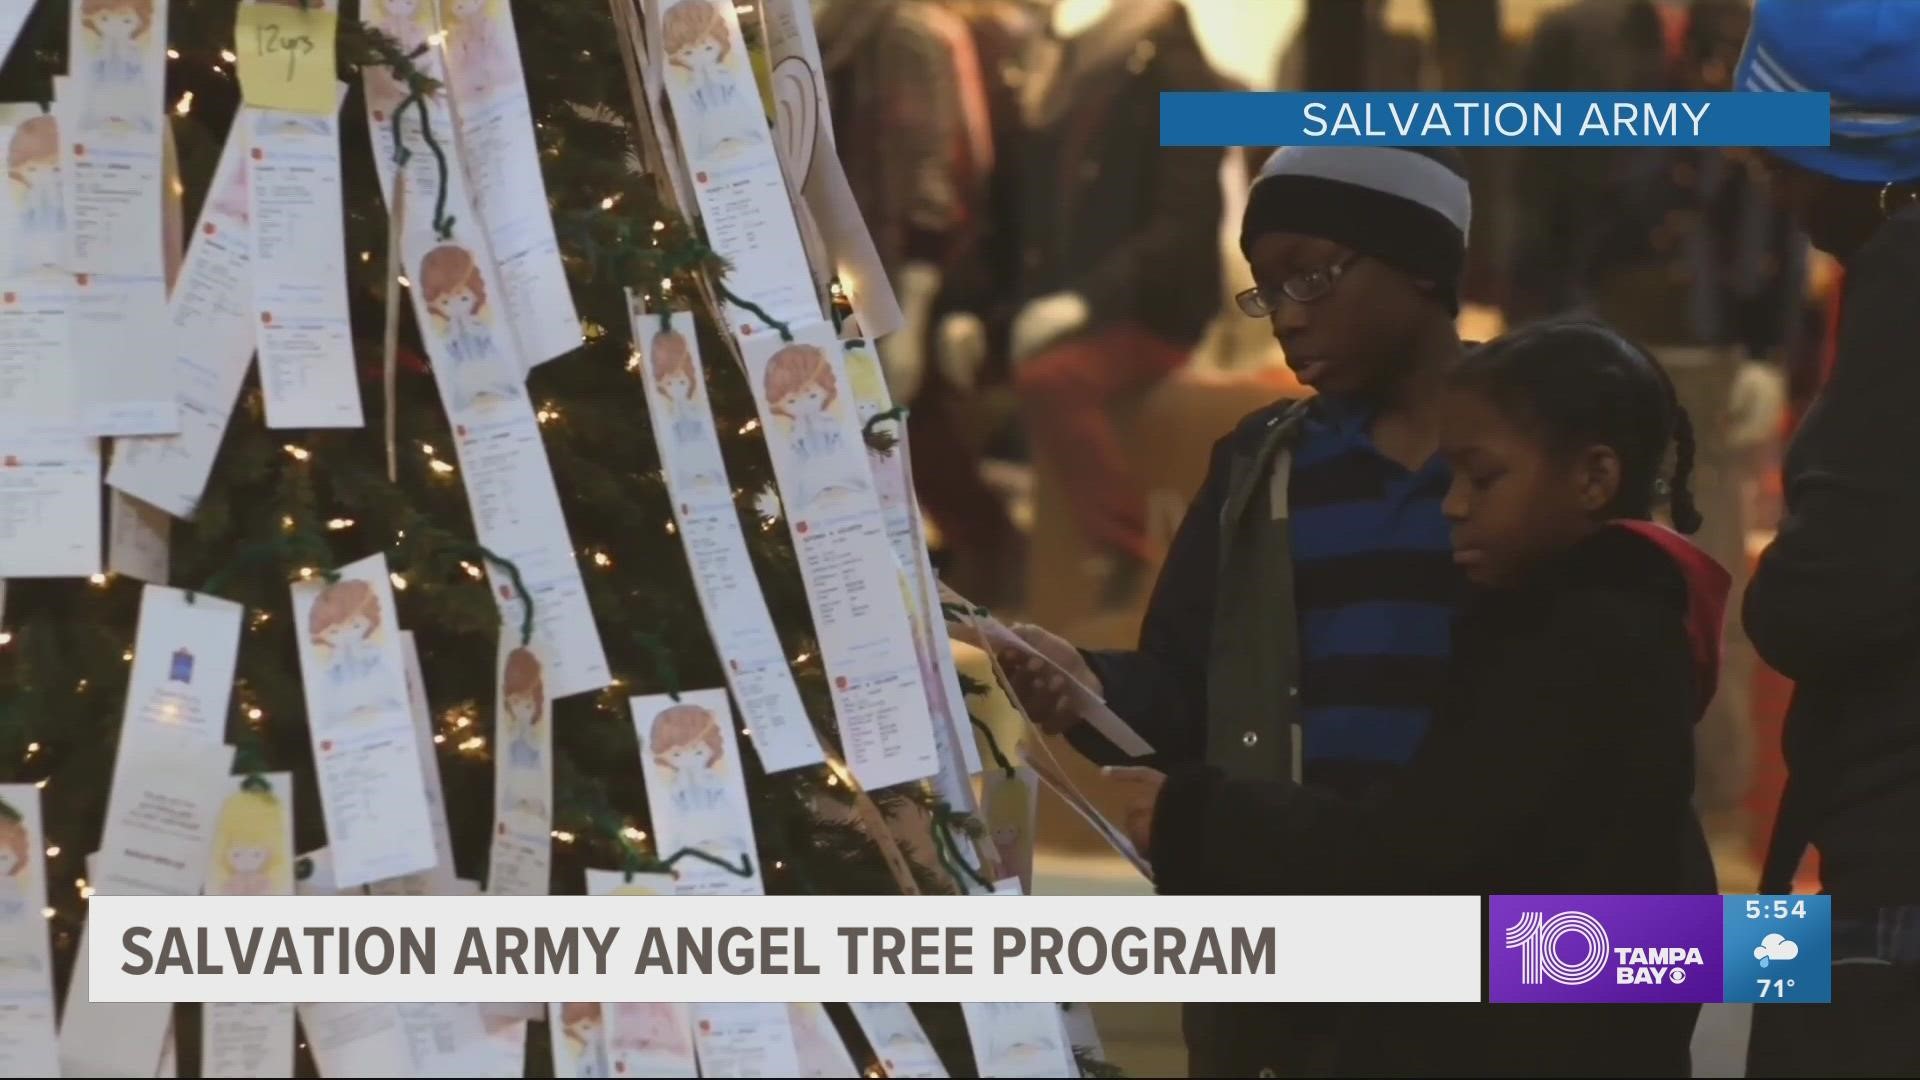 Achieva Credit Union and 10 Tampa Bay have partnered with The Salvation Army for its Angel Tree program.